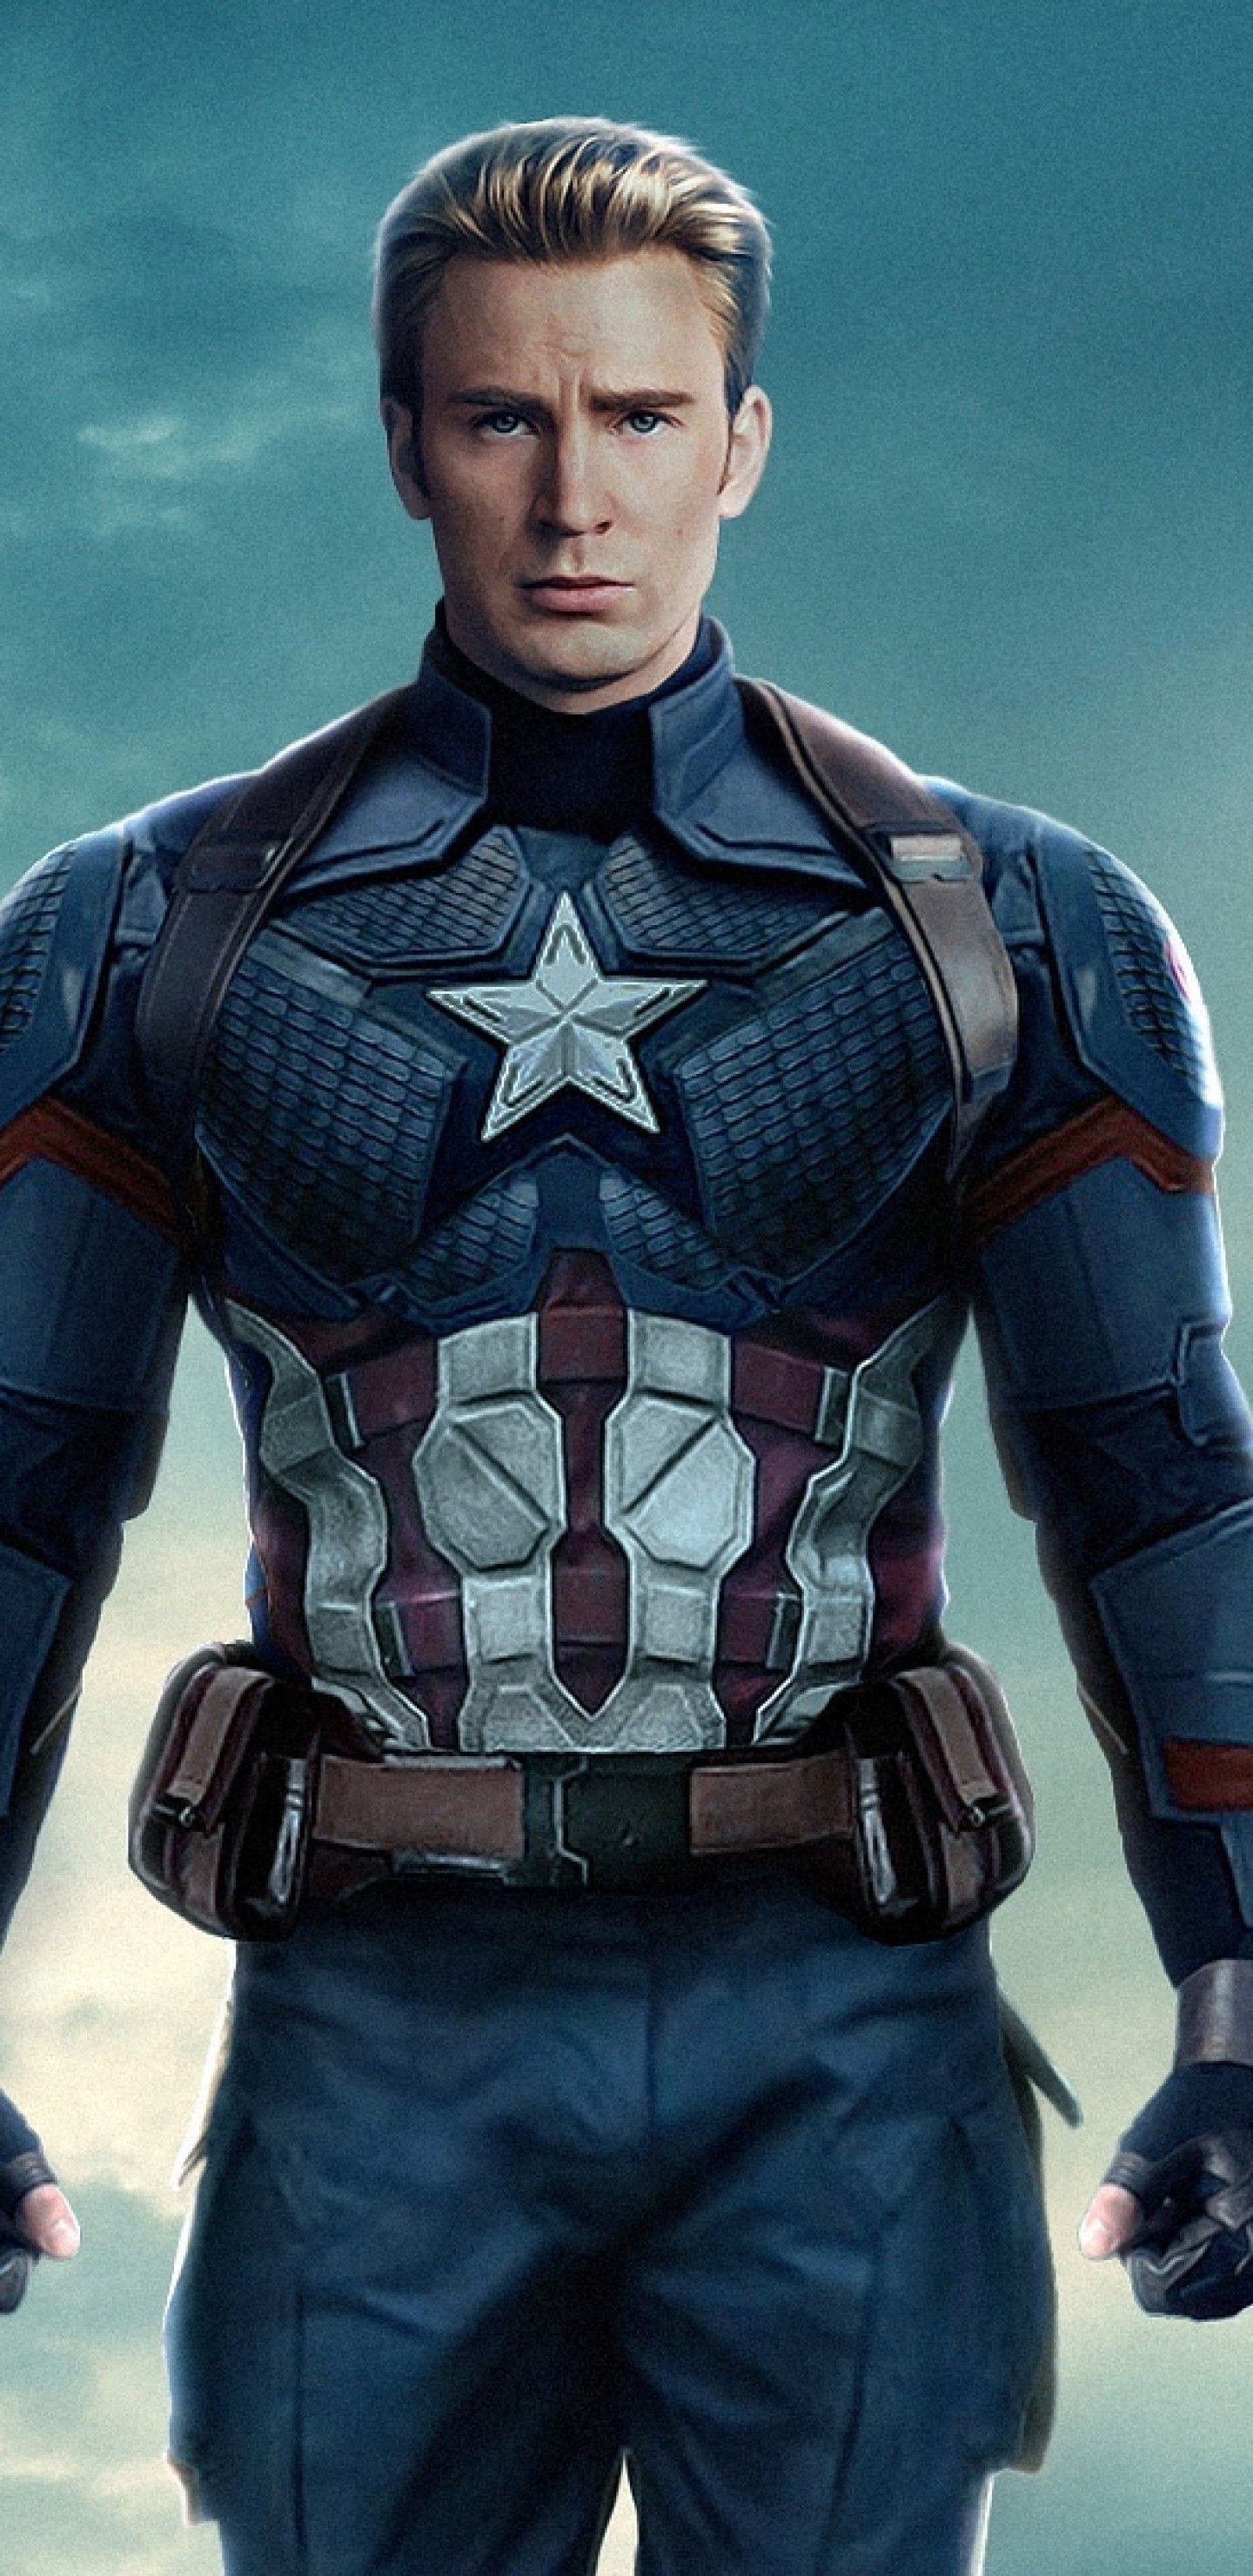 Download 1440x2960 Captain America: The Winter Soldier, Chris